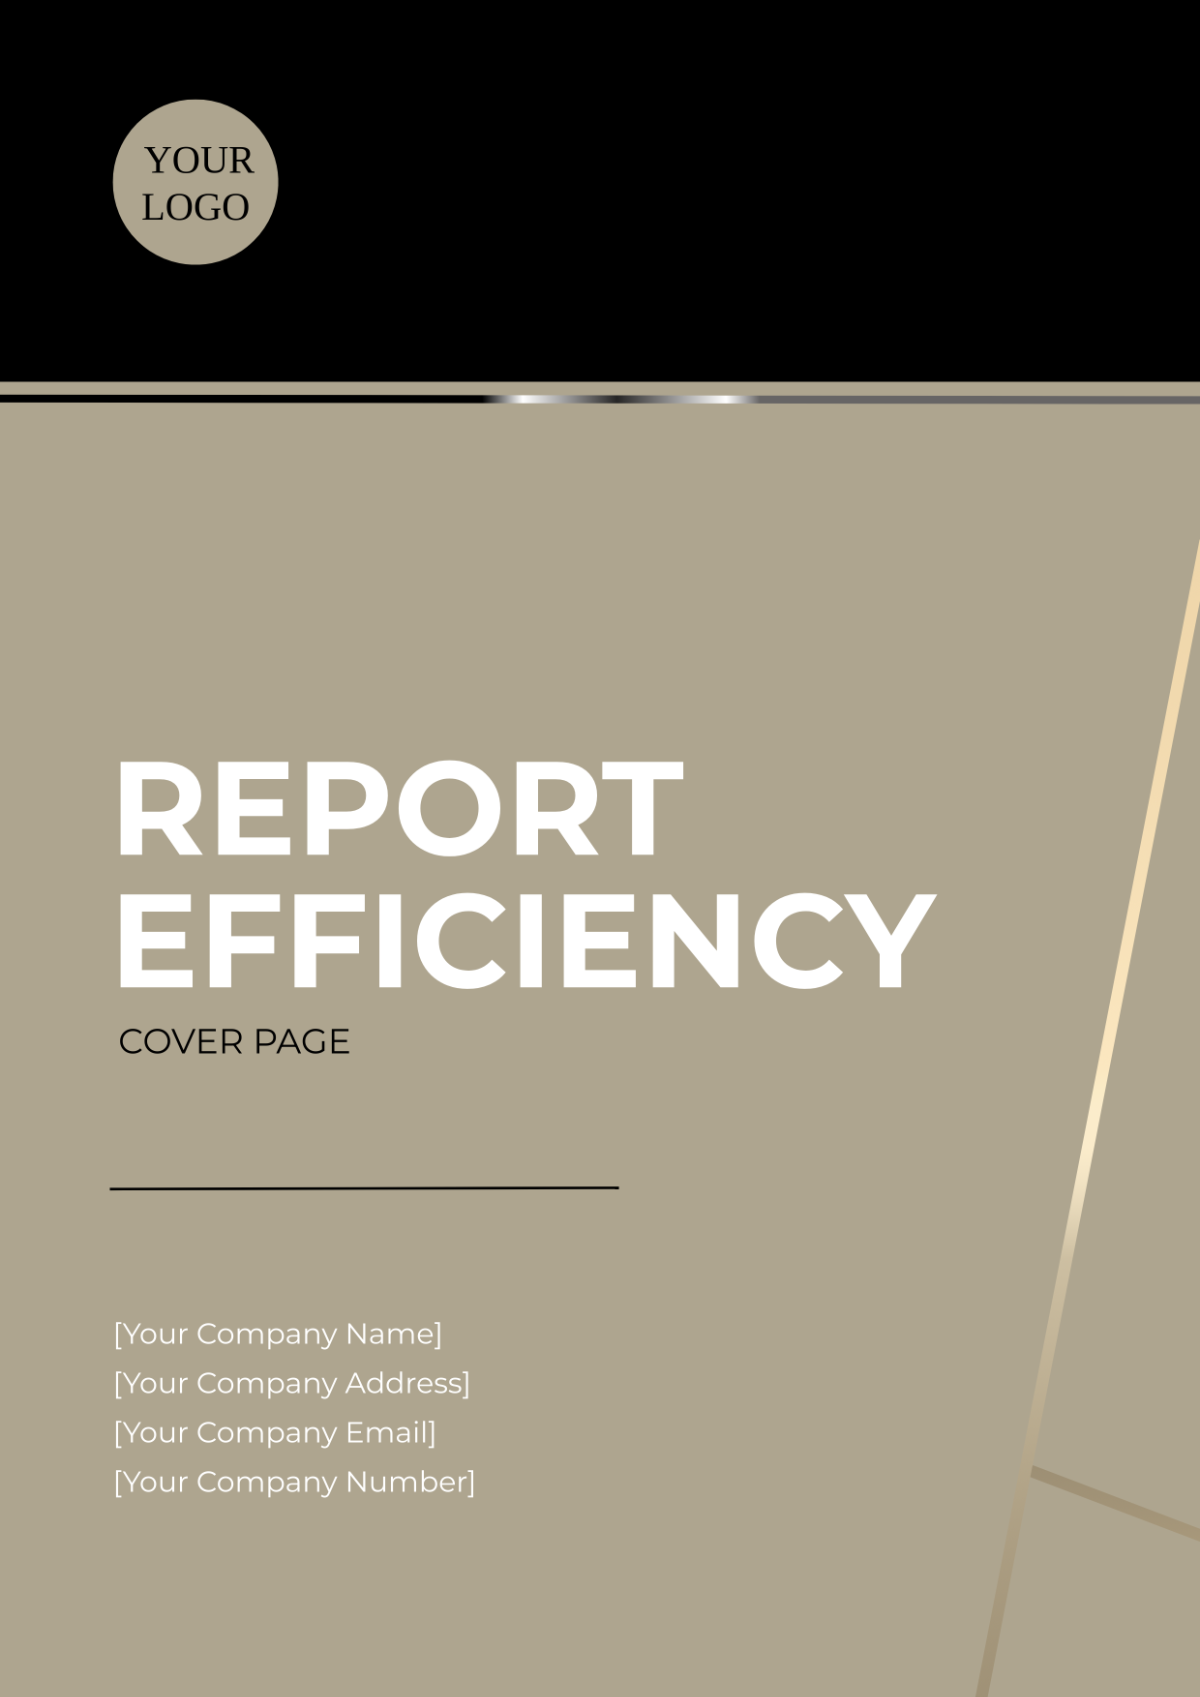 Report Efficiency Cover Page